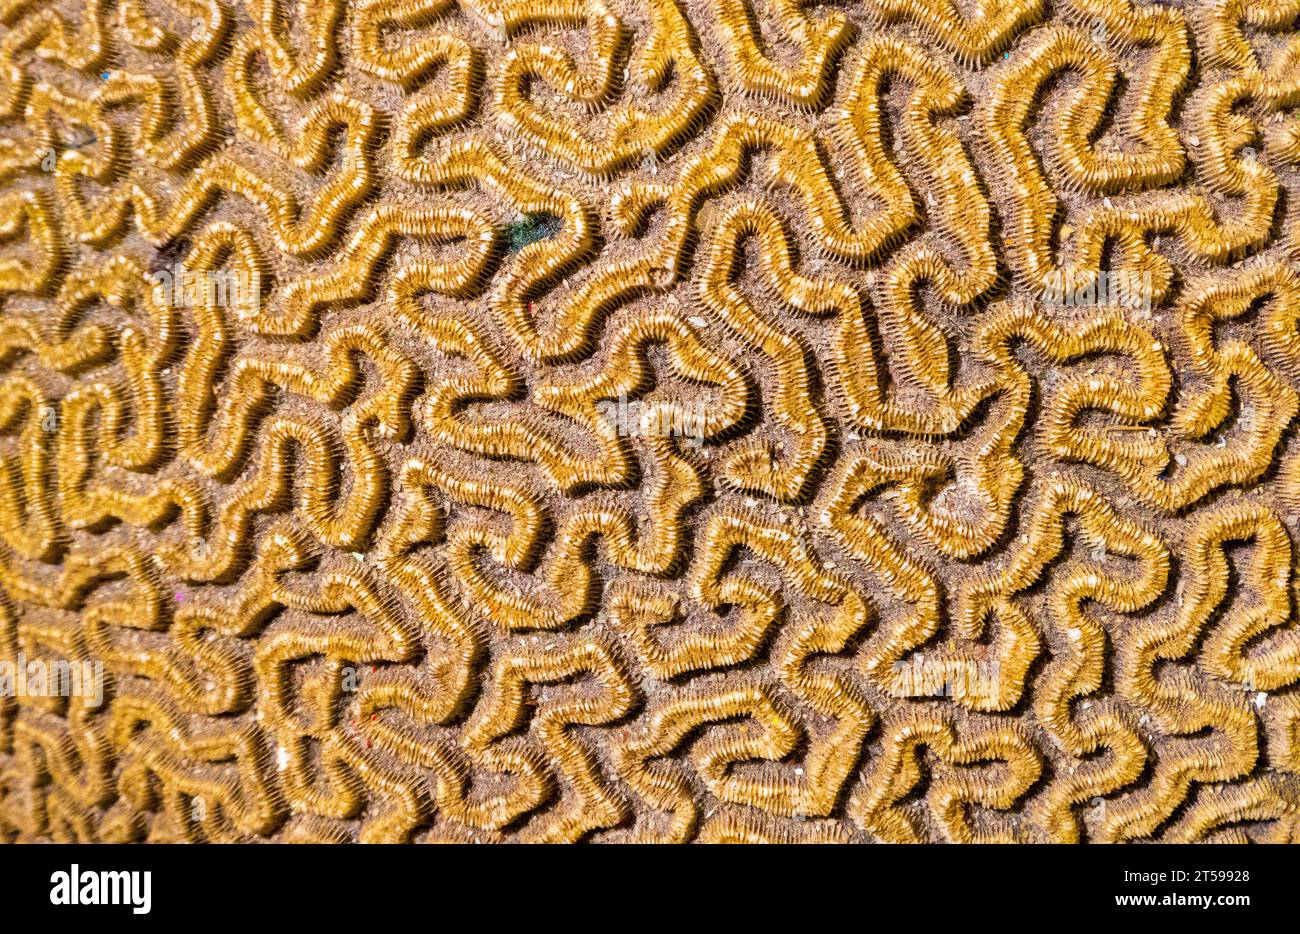 detail of brain coral Stock Photo